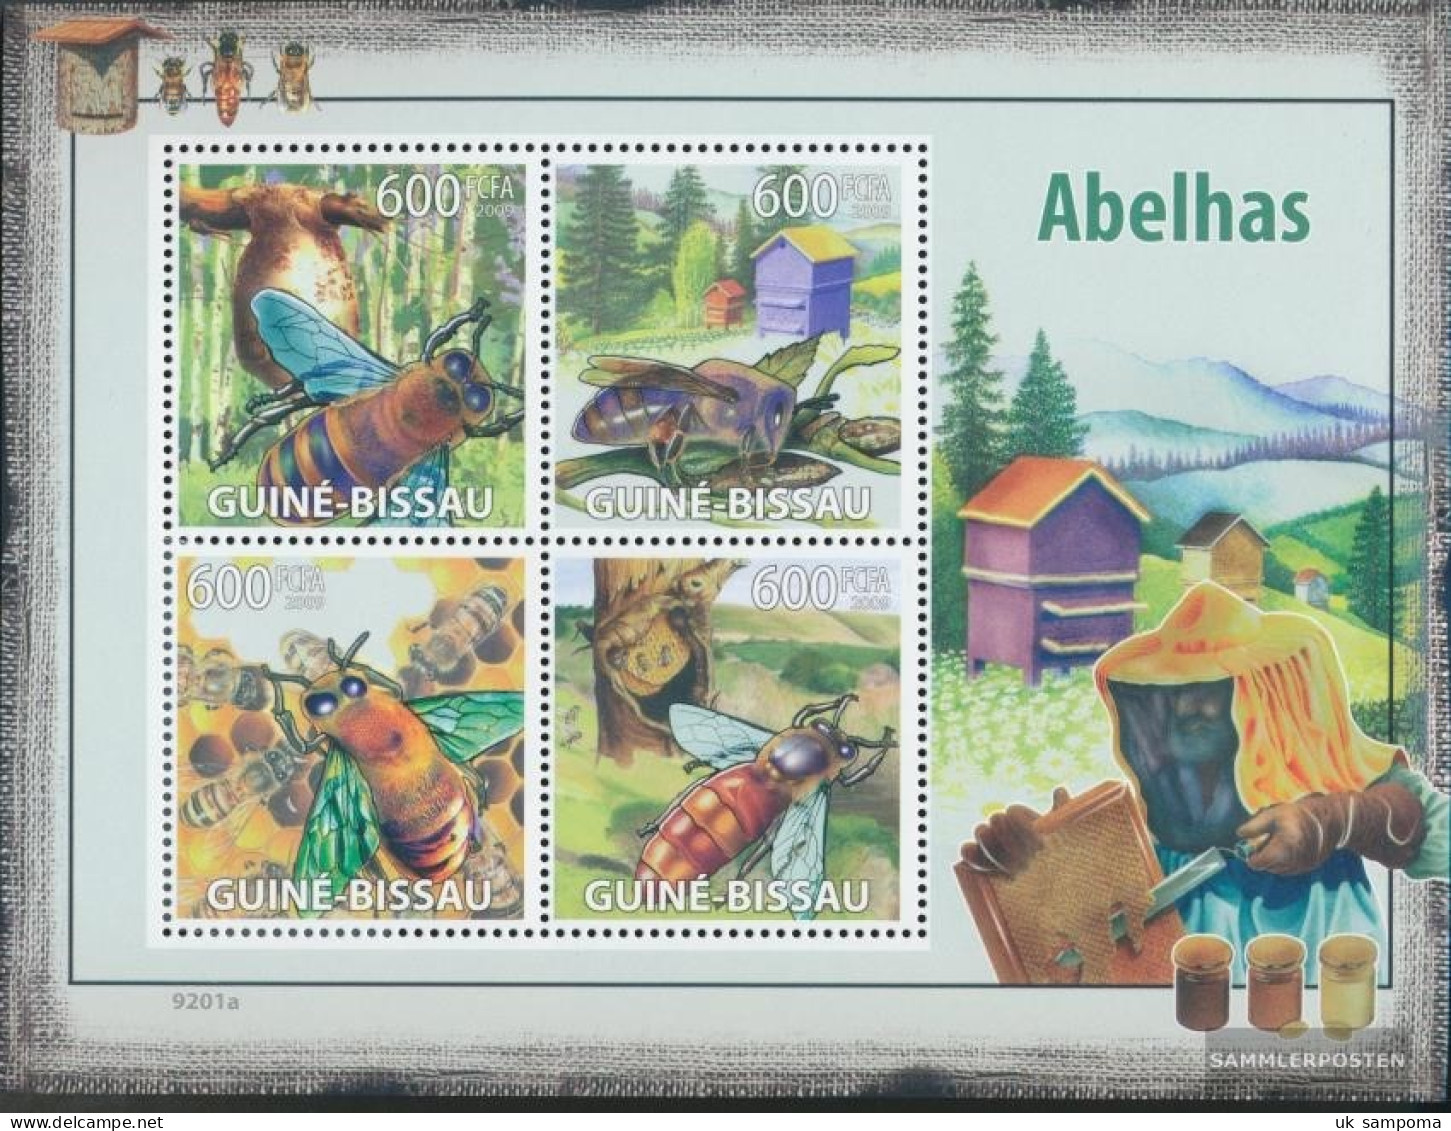 Guinea-Bissau 4131-4134 Sheetlet (complete. Issue) Unmounted Mint / Never Hinged 2009 Bees - Guinea-Bissau